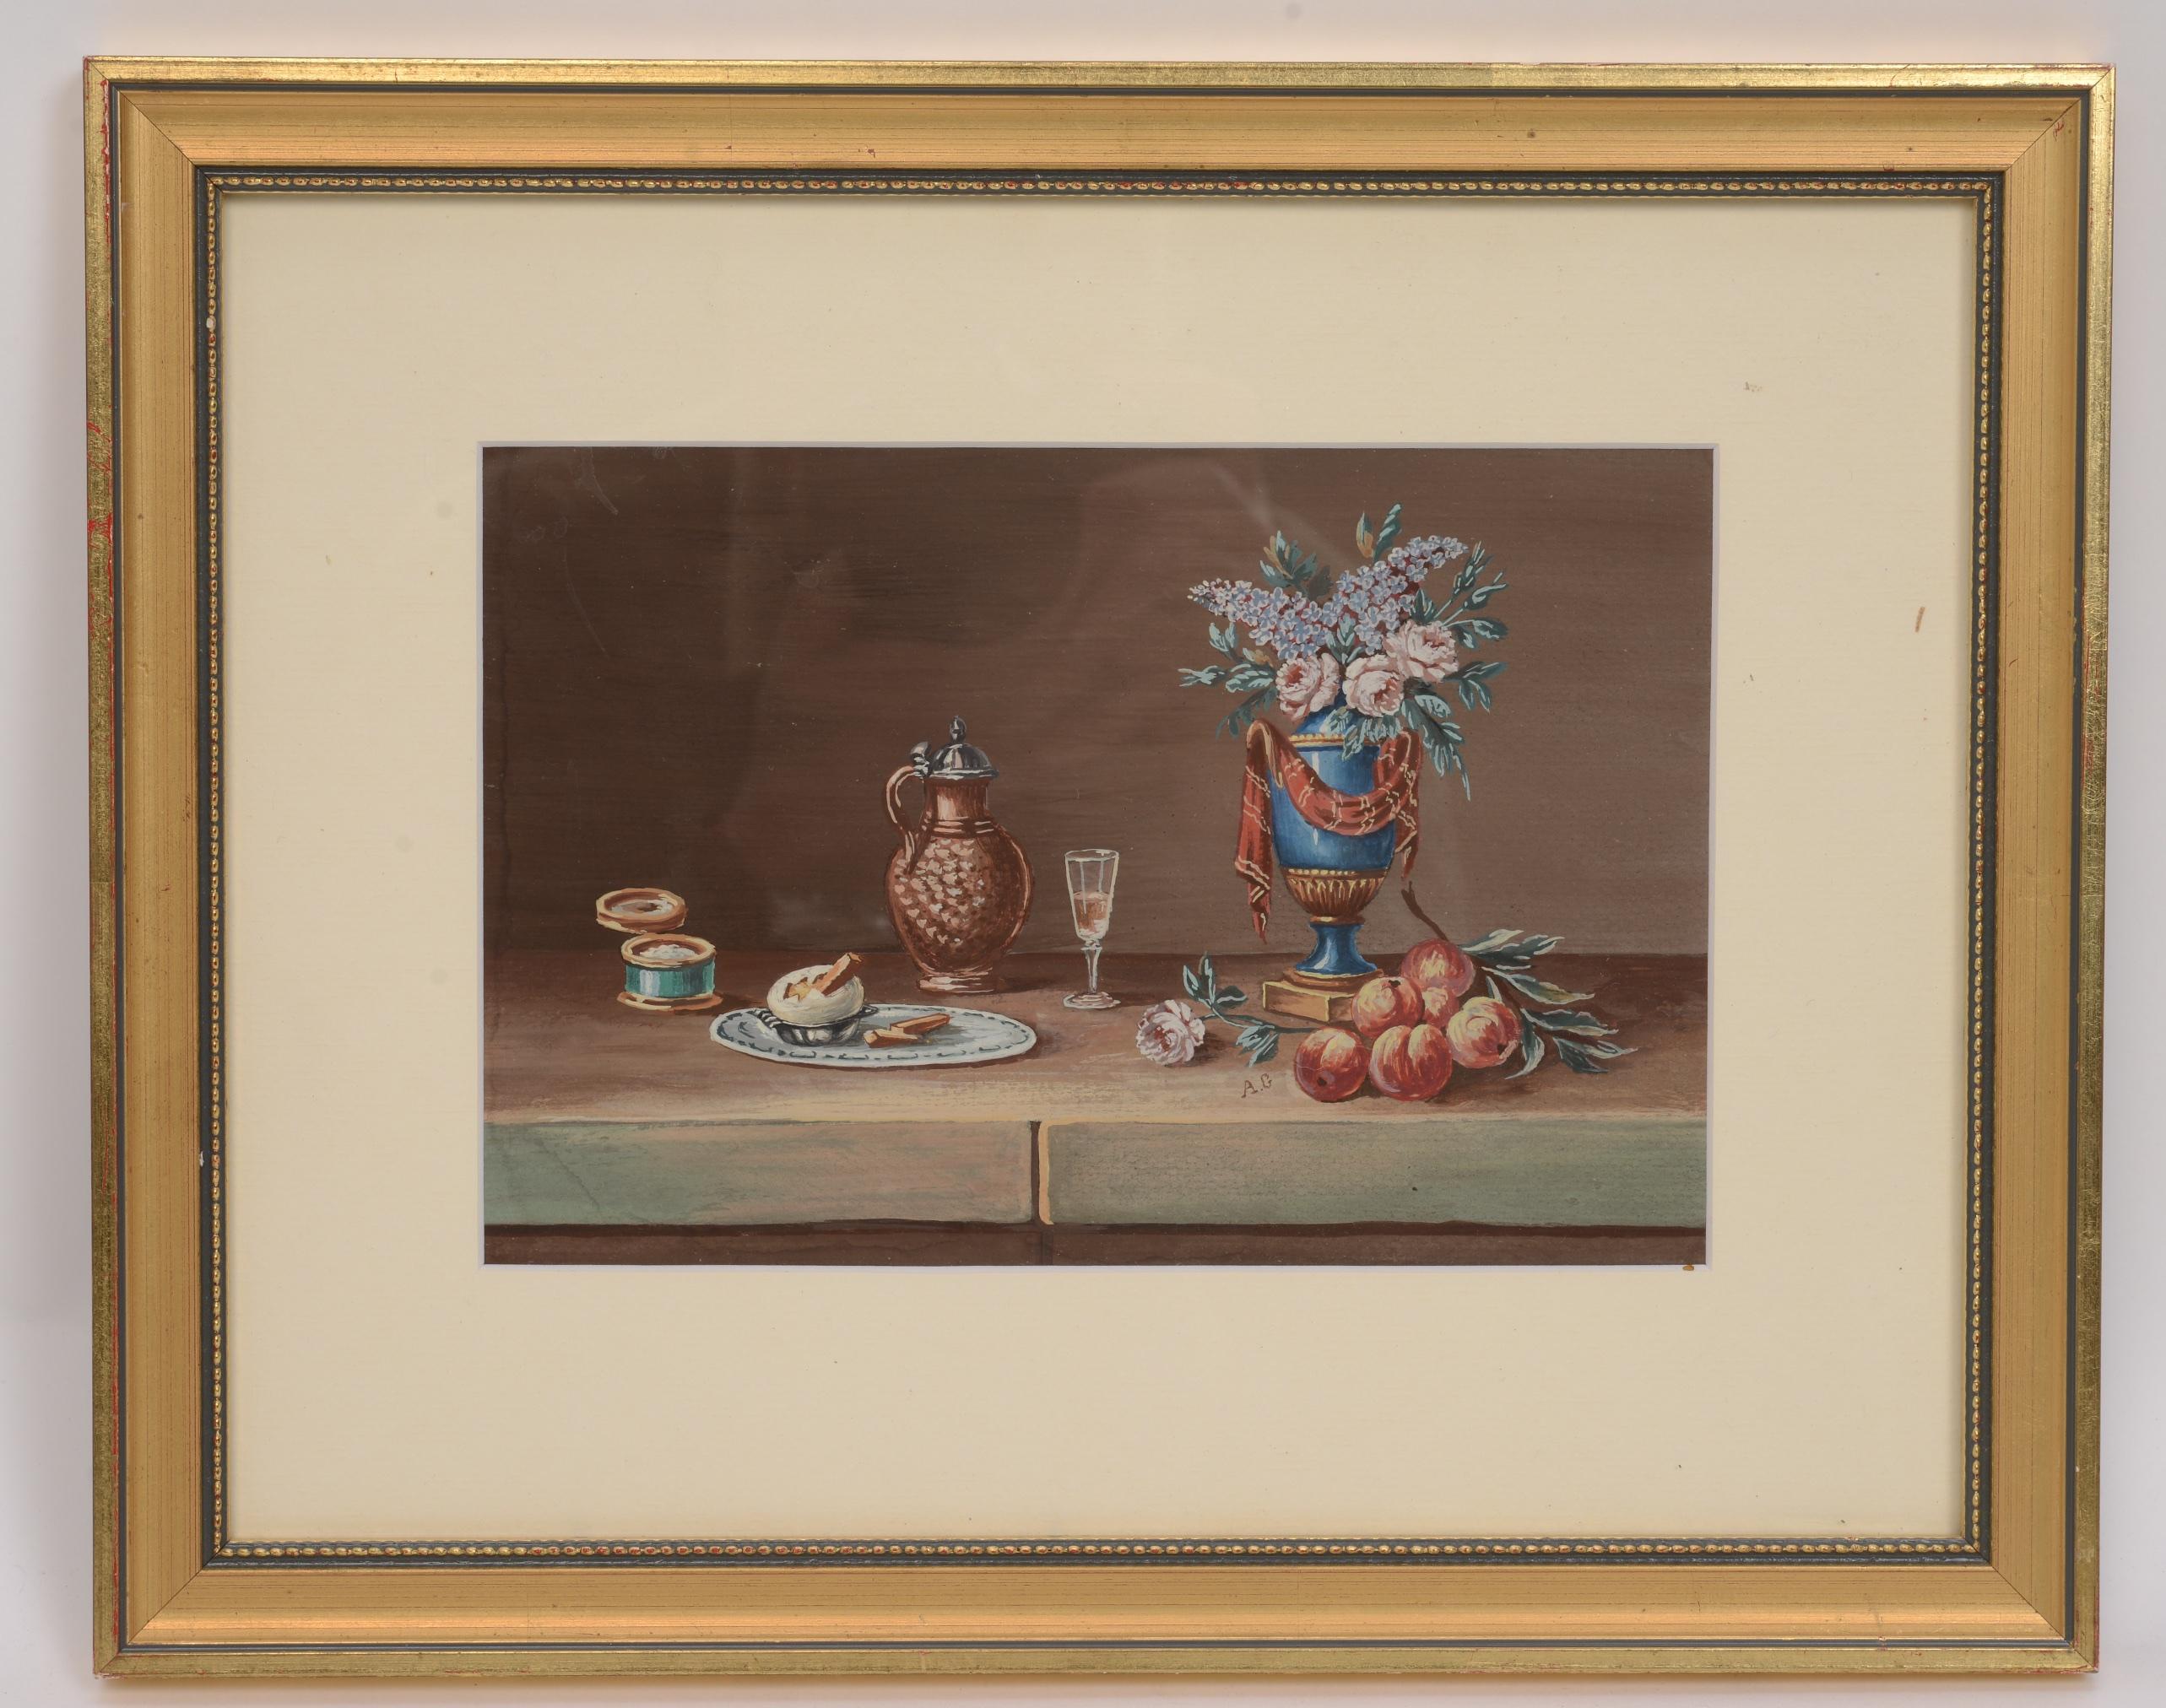 Pair of late 19th century still life Gouaches after Paul LeLong, French, 1799-1846. His specialty was small still-life of table tops with various objects. One with flowers, fruit, wine and bread. The other with flowers, fruit, wine and an egg. Both